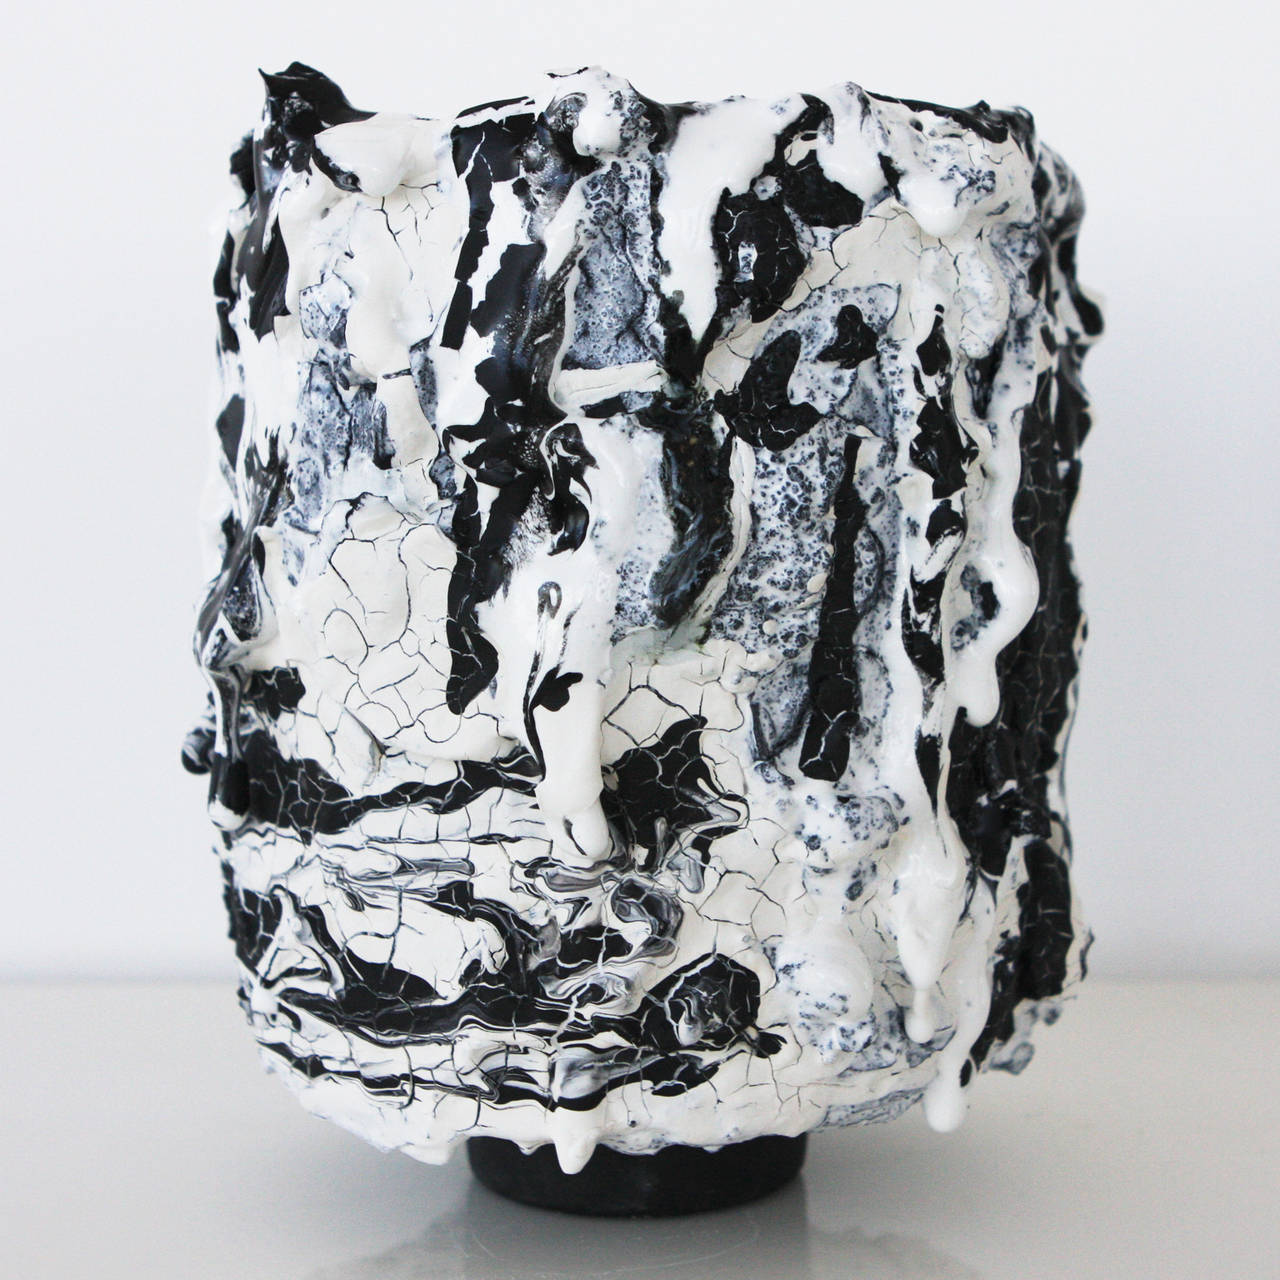 Contemporary ceramic vessel by LA based mixed-media sculptor Brian Rochefort for Kelly Behun Studio. Highly textured and worked surface resulting from multiple firings. Black and white glaze on exterior, black glaze interior. Watertight, may be used